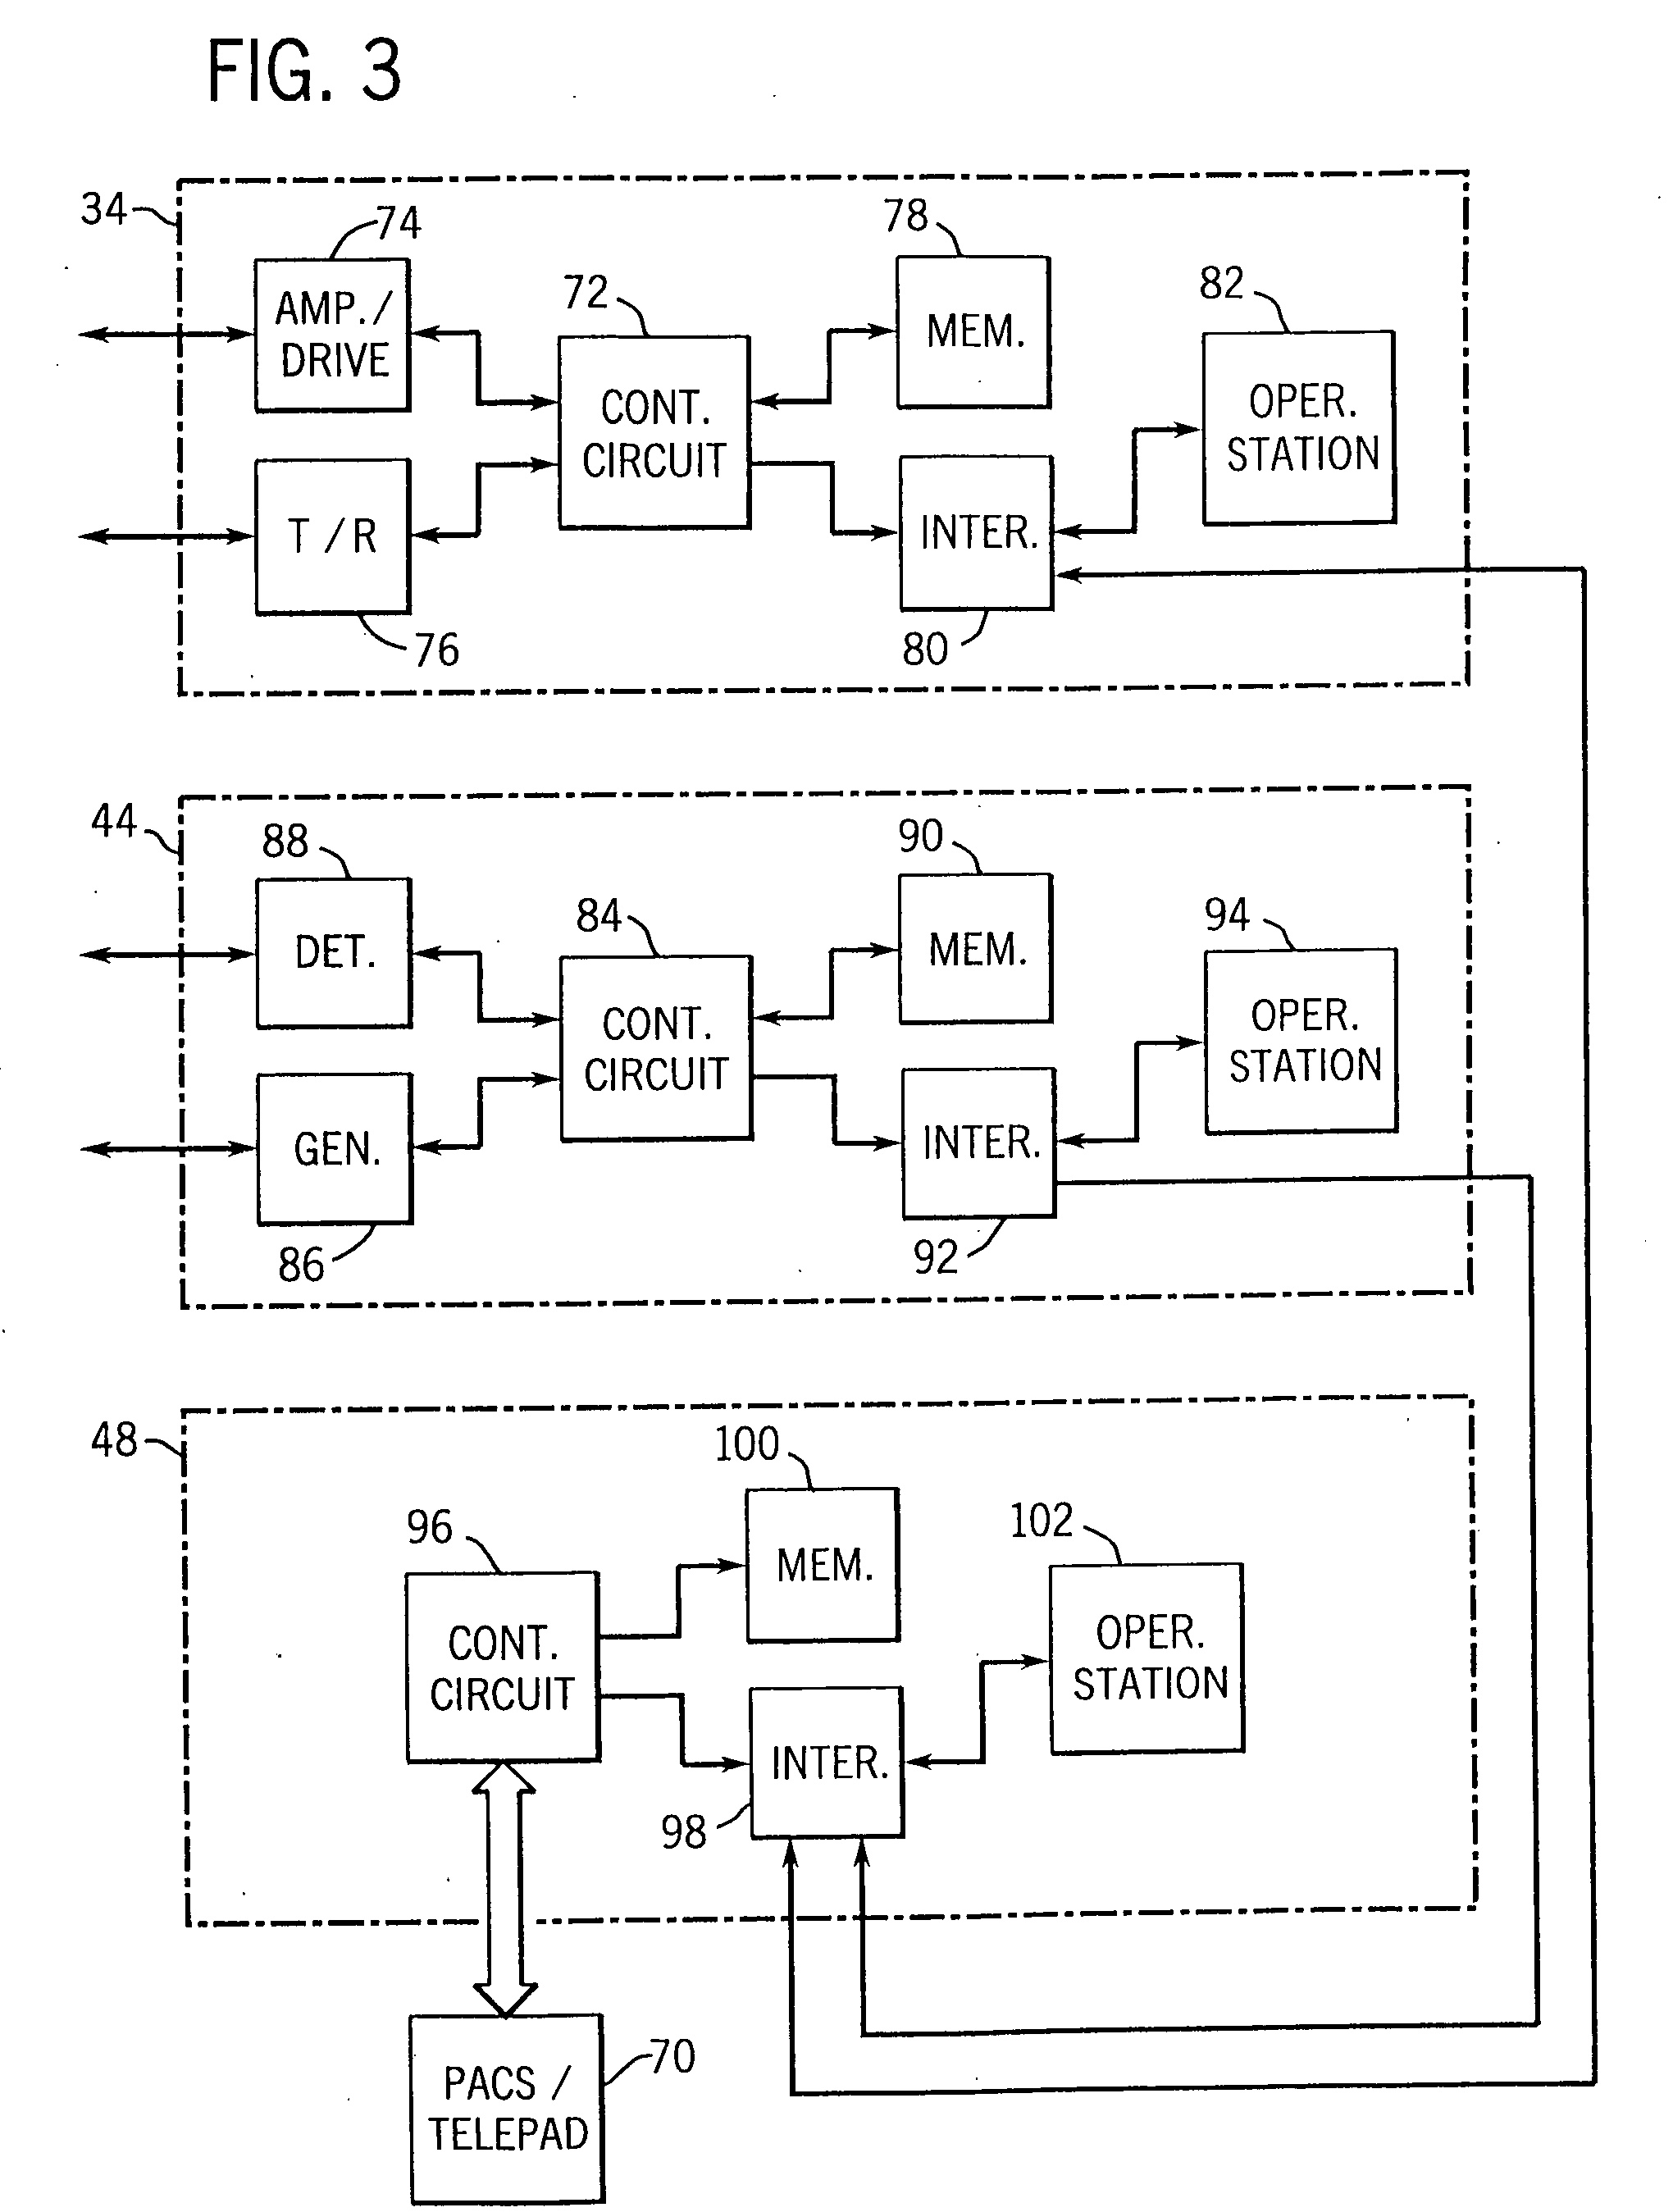 Integrated multi-modality imaging system and method